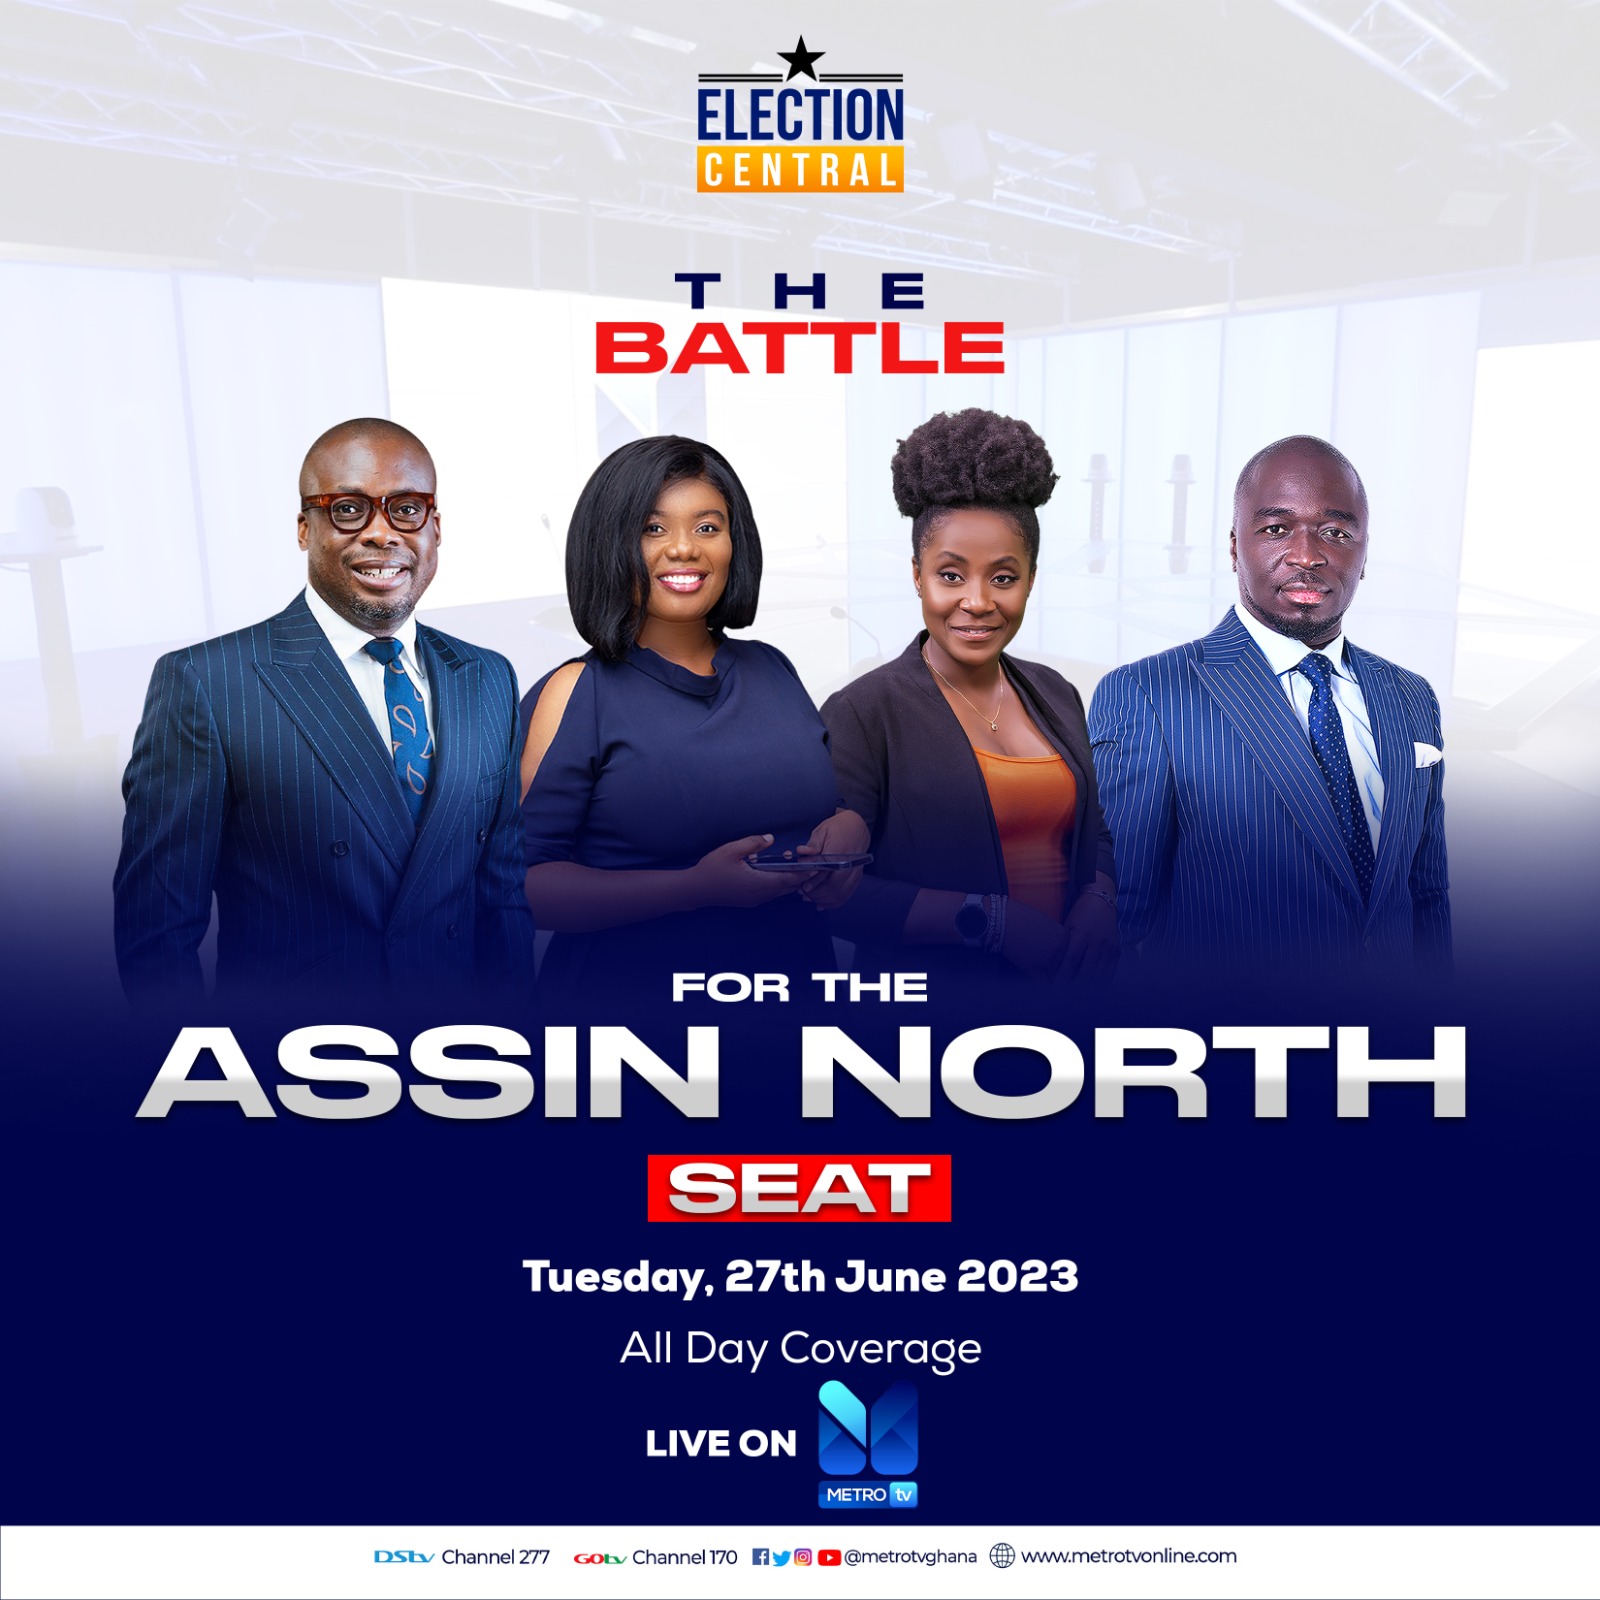 Watch Live: The Battle for the Assin North seat